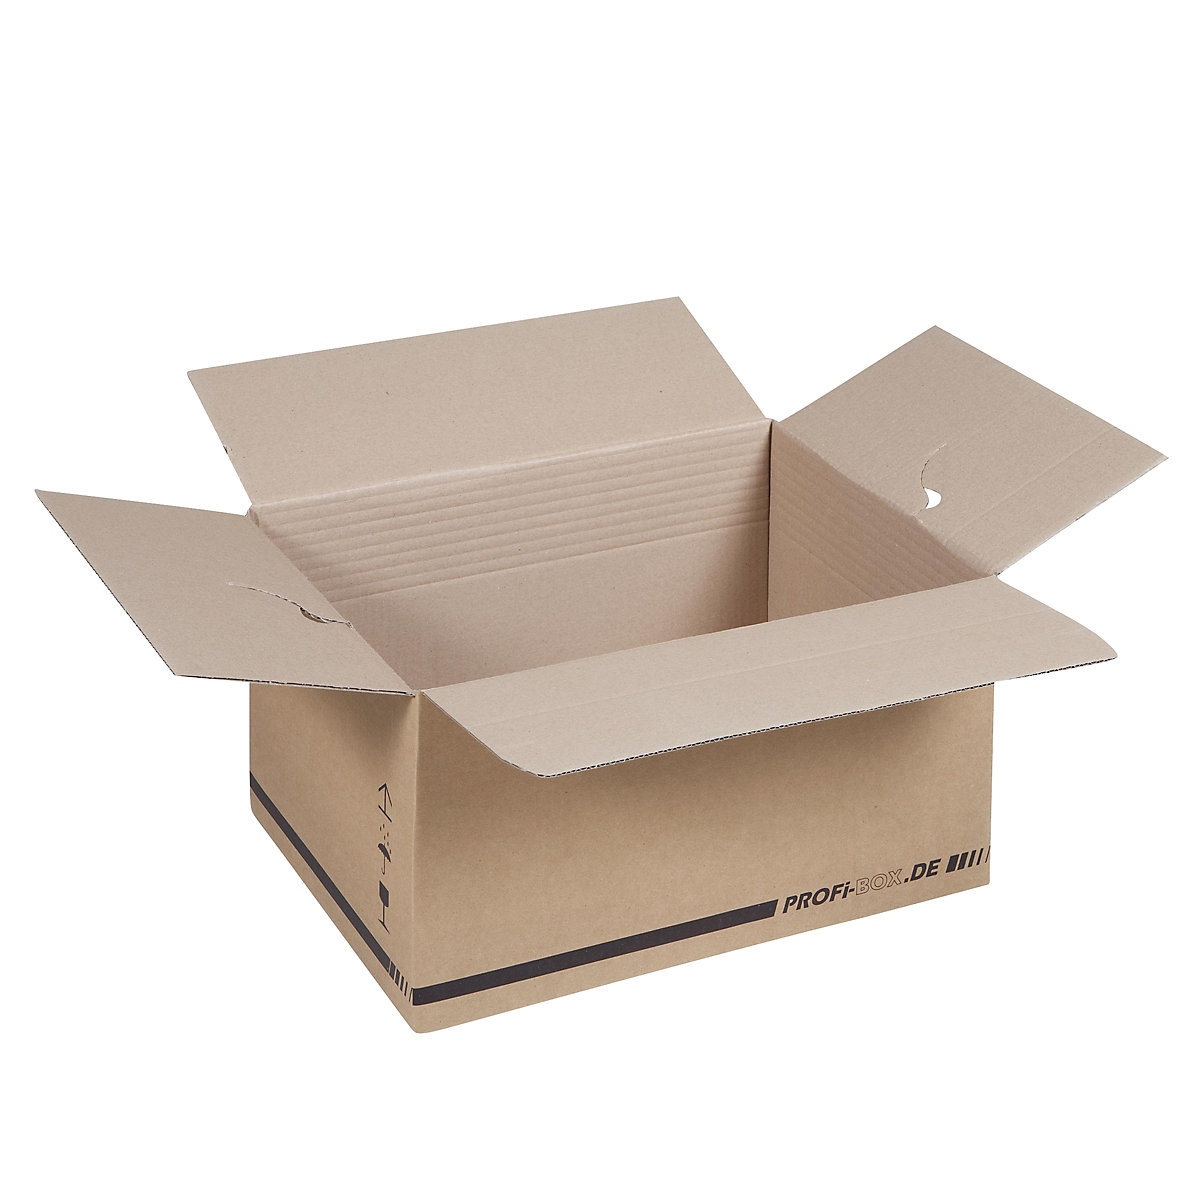 Professional boxes, made of single fluted cardboard, FEFCO 0701, internal dimensions 445 x 315 x 235 mm, pack of 50-3